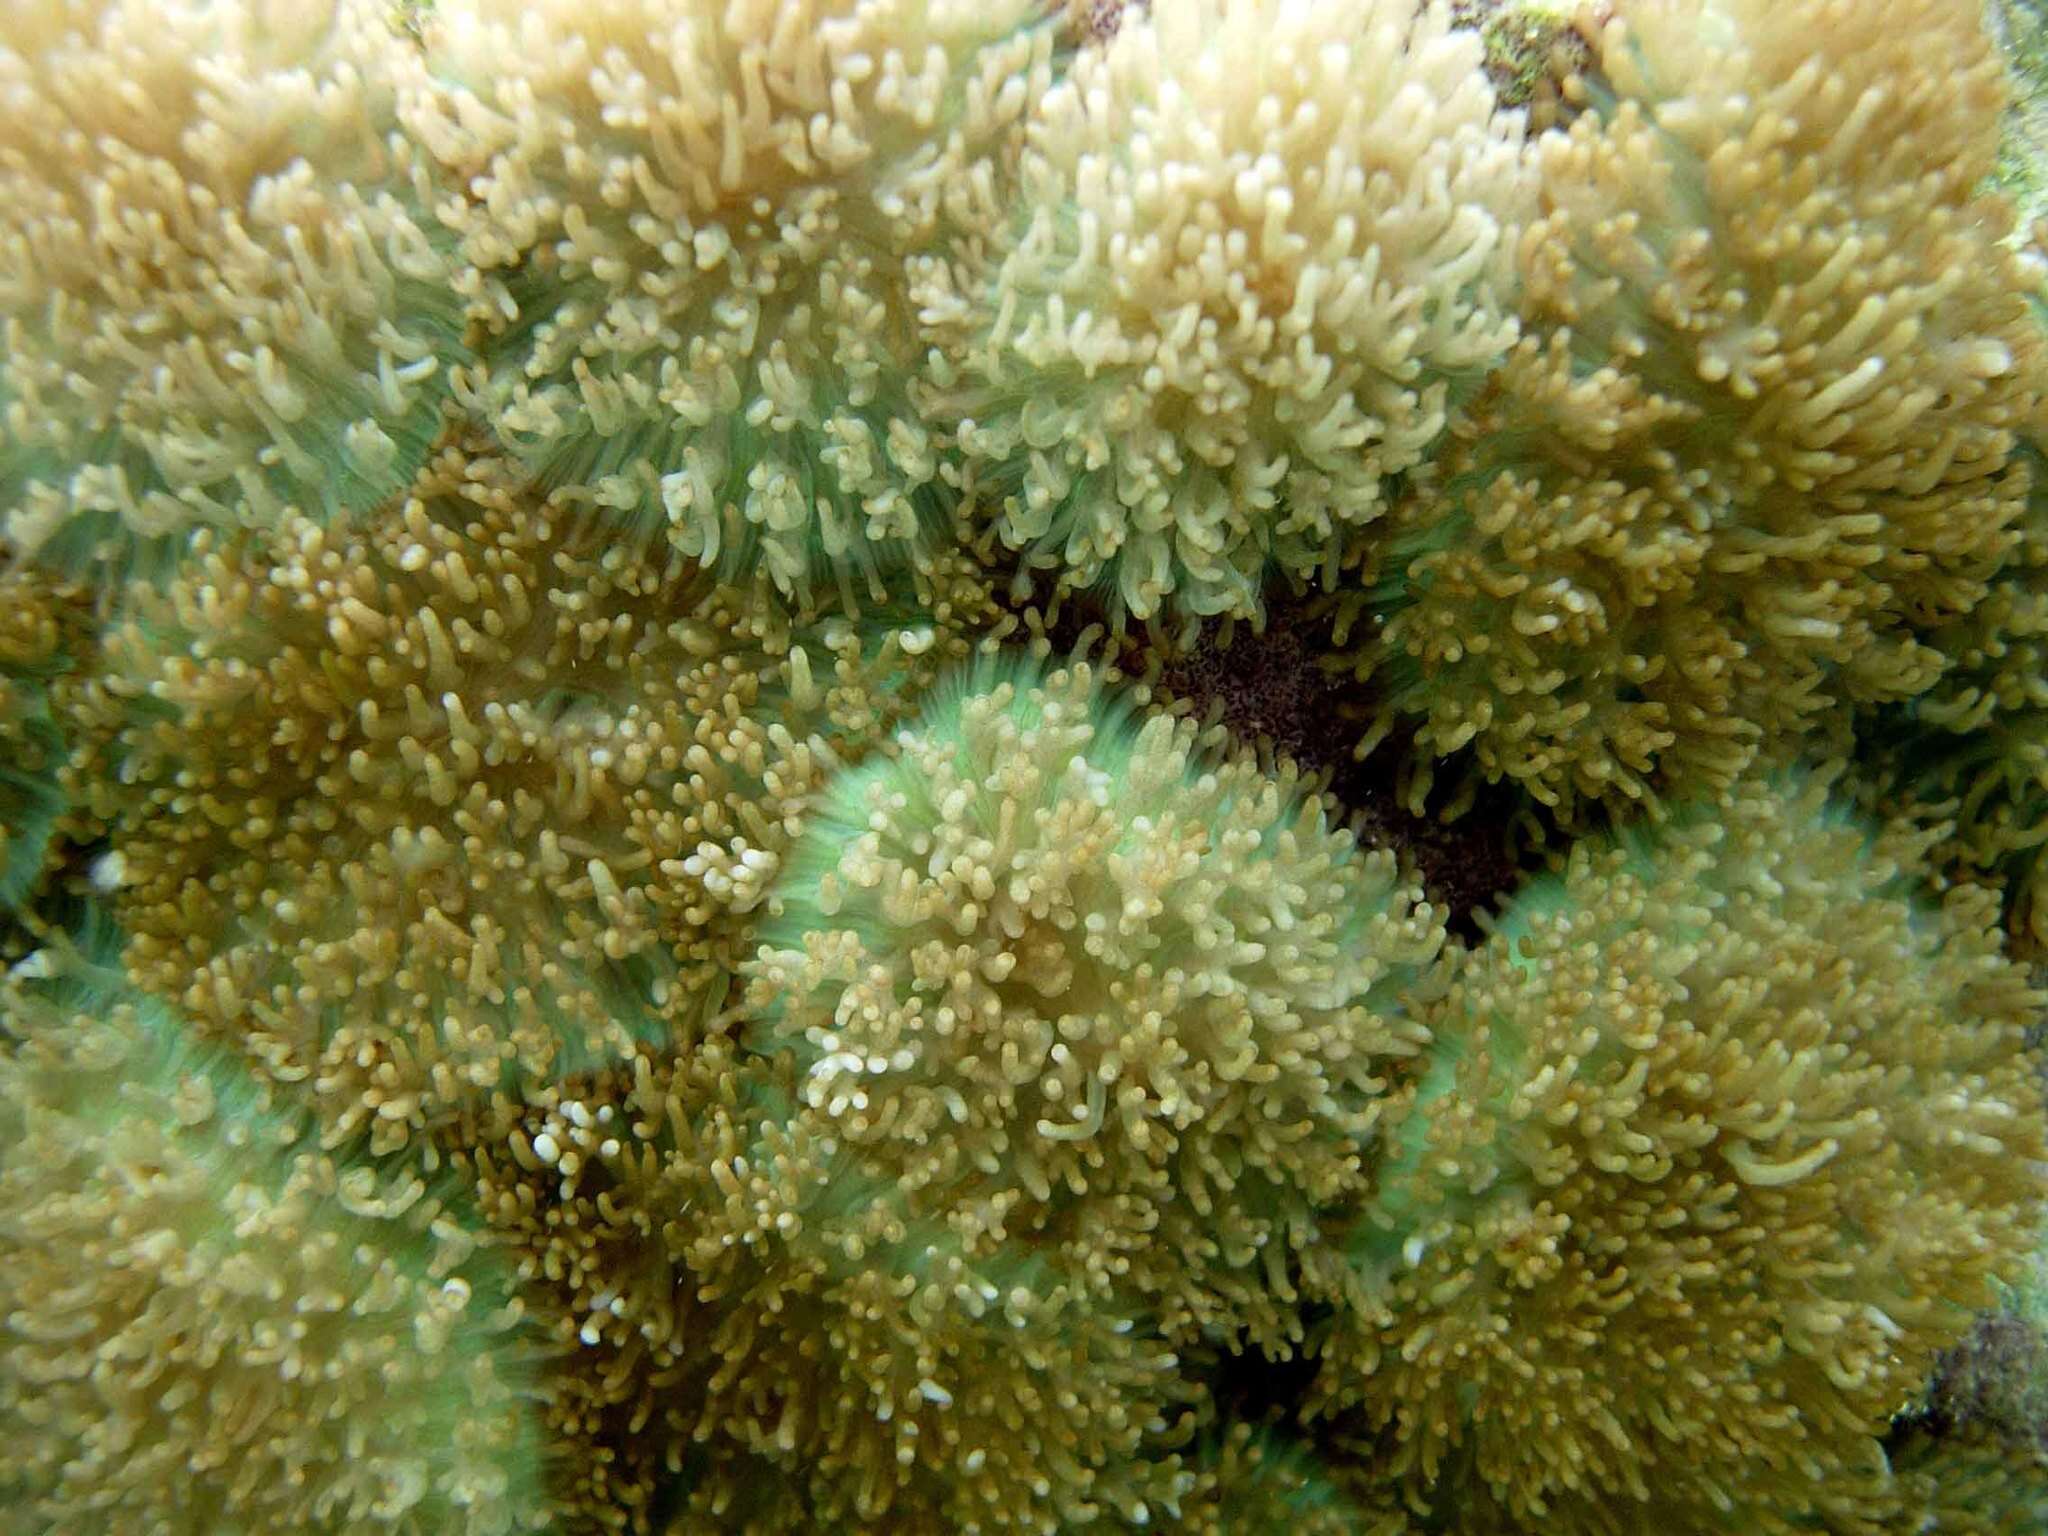 Image of red-mouth mushroom anemone